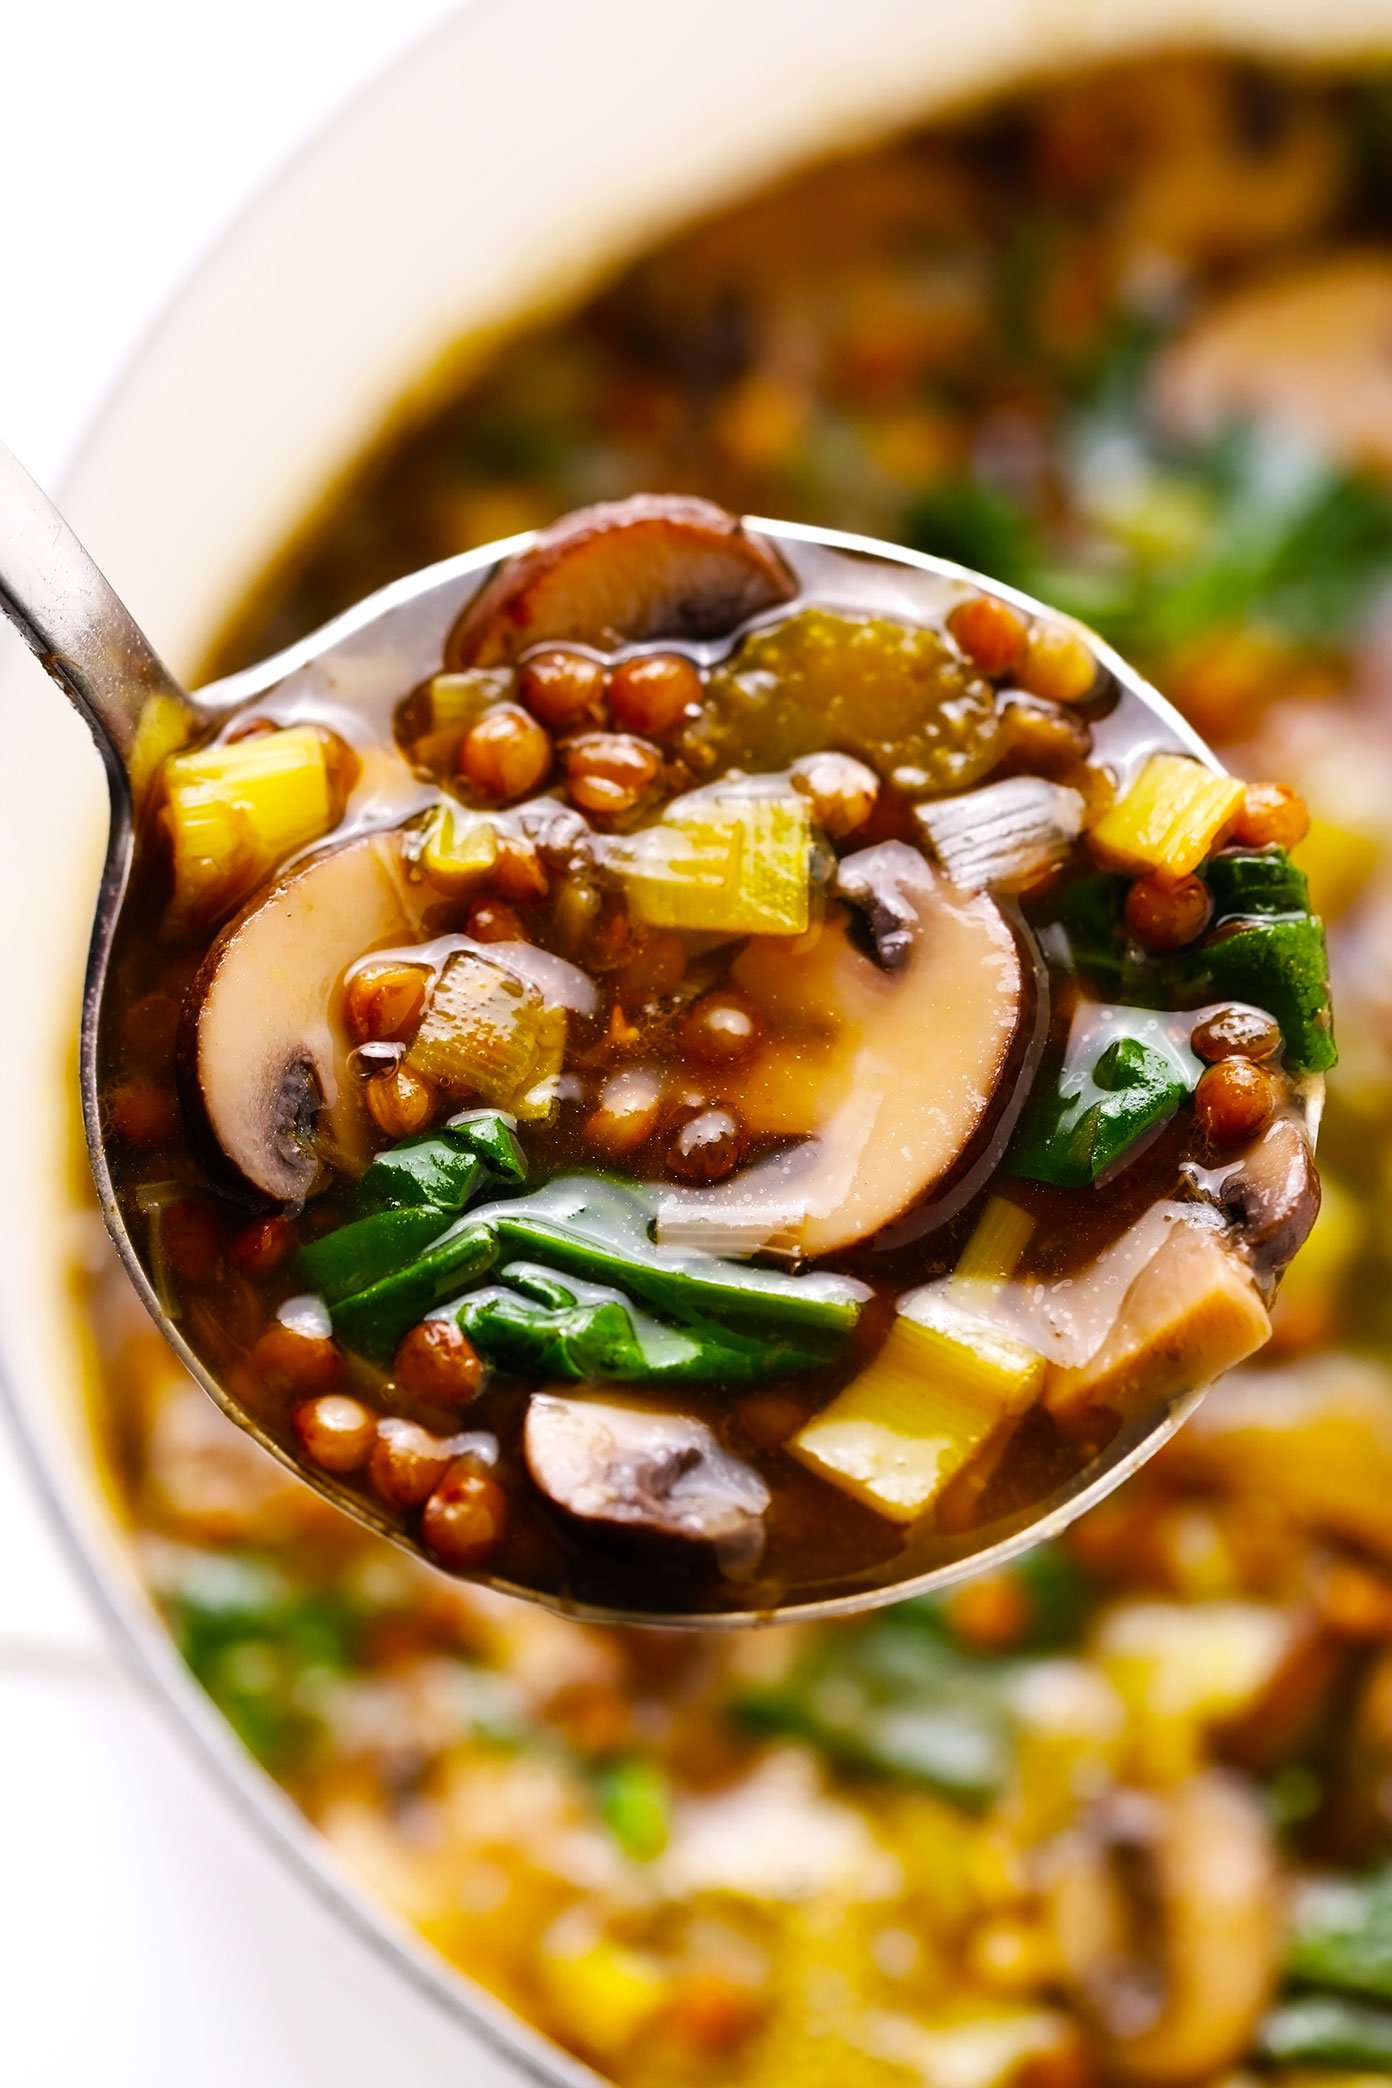 French Lentil Soup with Mushrooms and Spinach in Ladle